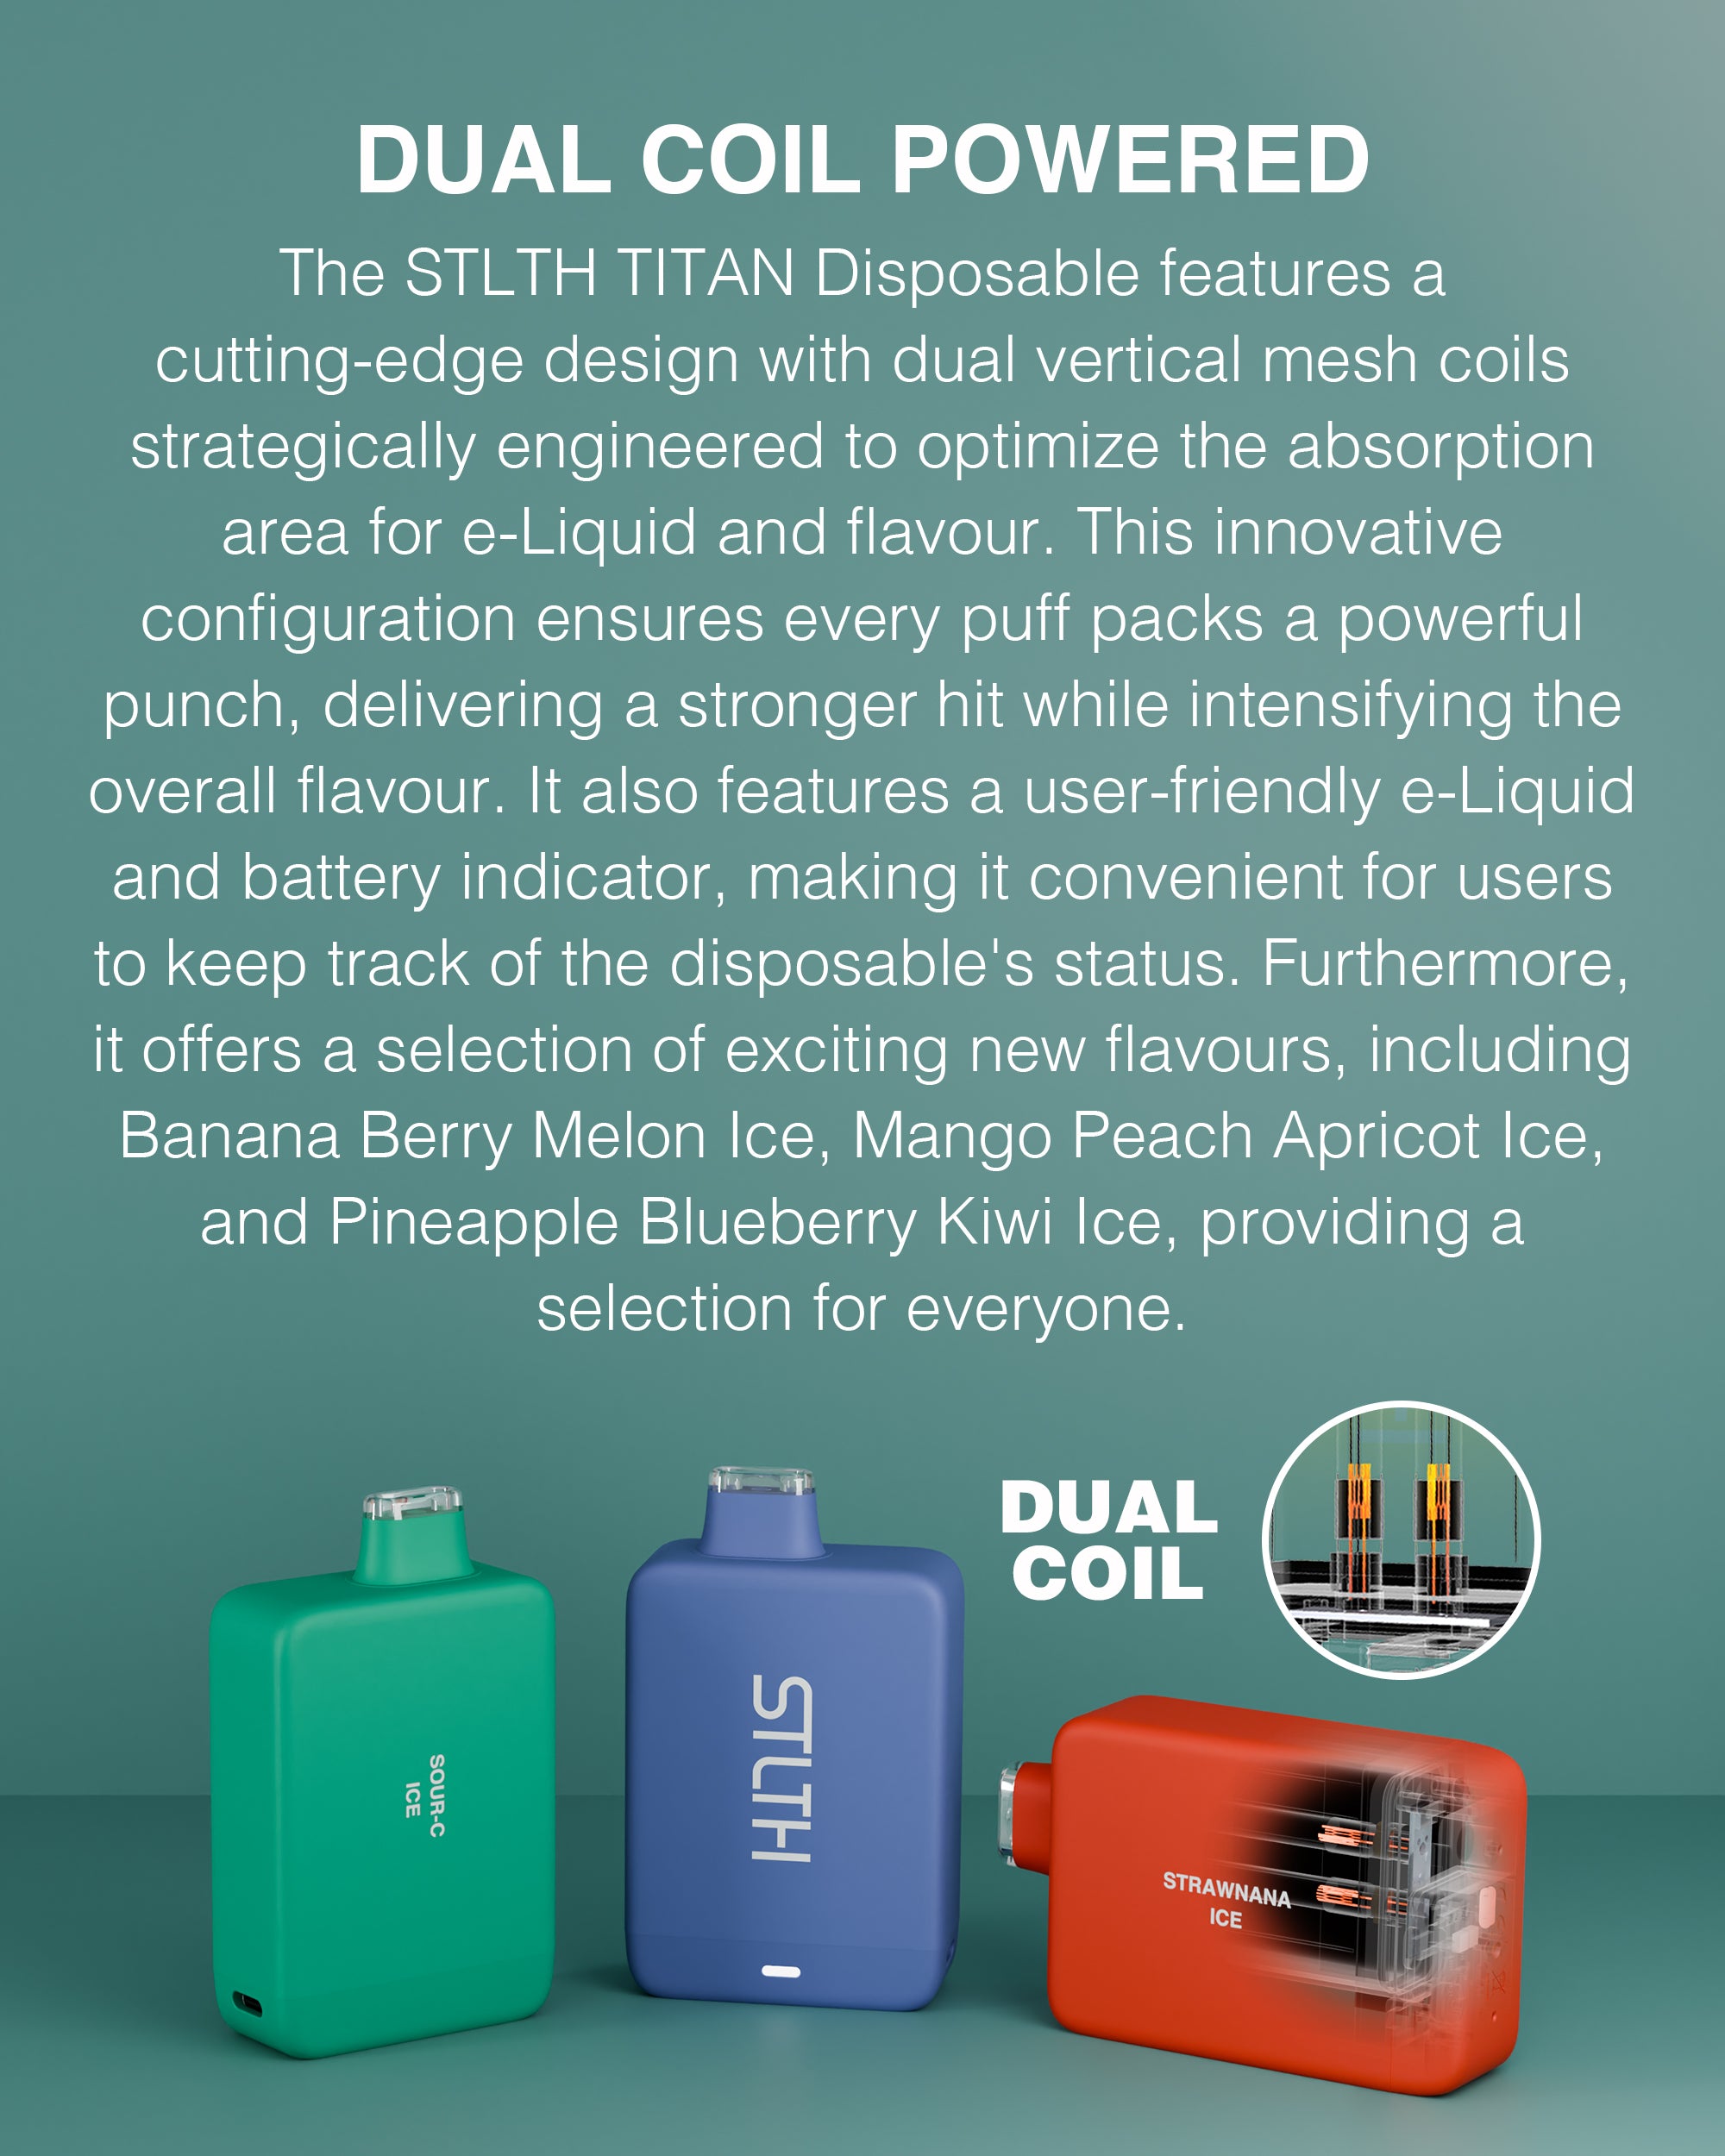 DUAL COIL POWERED: The STLTH TITAN Disposable features a cutting-edge design with dual vertical mesh coils strategically engineered to optimize the absorption area for e-Liquid and flavour. This innovative configuration ensures every puff packs a powerful punch, delivering a stronger hit while intensifying the overal flavour. It also features a user-friendly e-Liquid and battery indicator, making it convenient for users to keep track of the disposable's status. Furthermore, it offers a selection of exiting new flavours, including Banana Berry Melon Ice, Mango Peach Apricot Ice, and Pineapple Blueberry Kiwi Ice, providing a selection for everyone.